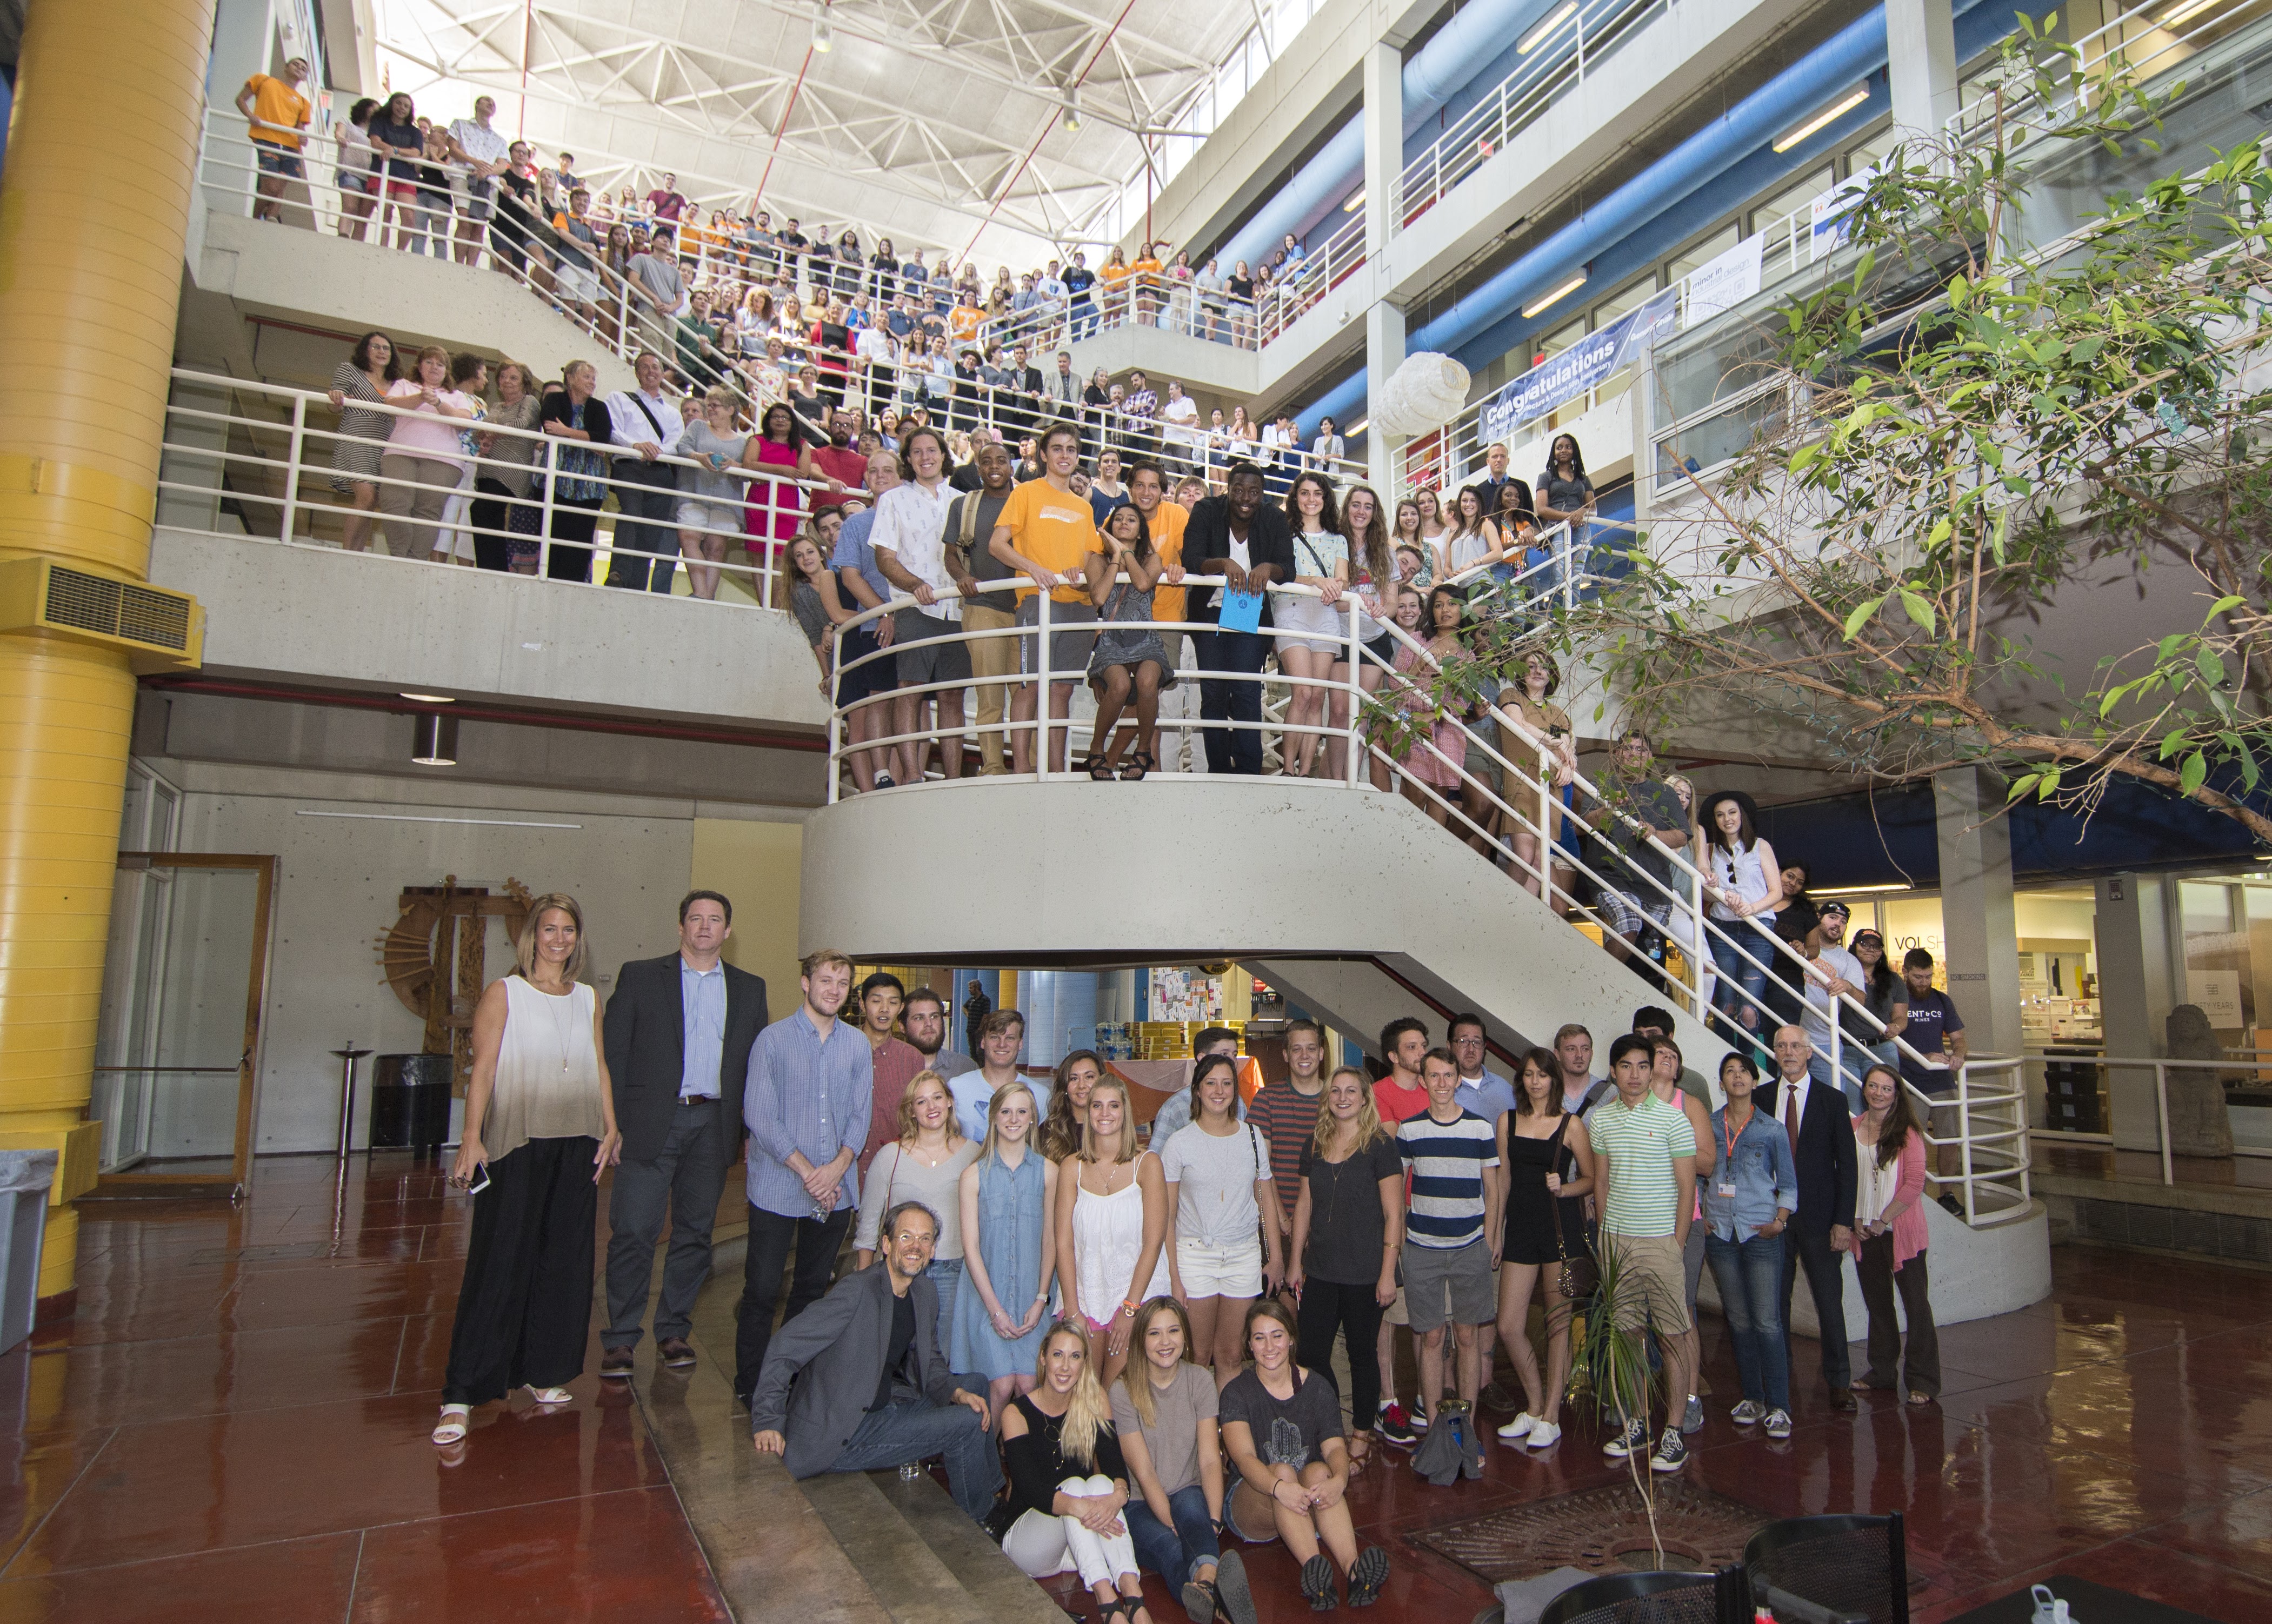 Students and faculty from the college gather on the stairs in the Art + Architecture Building.